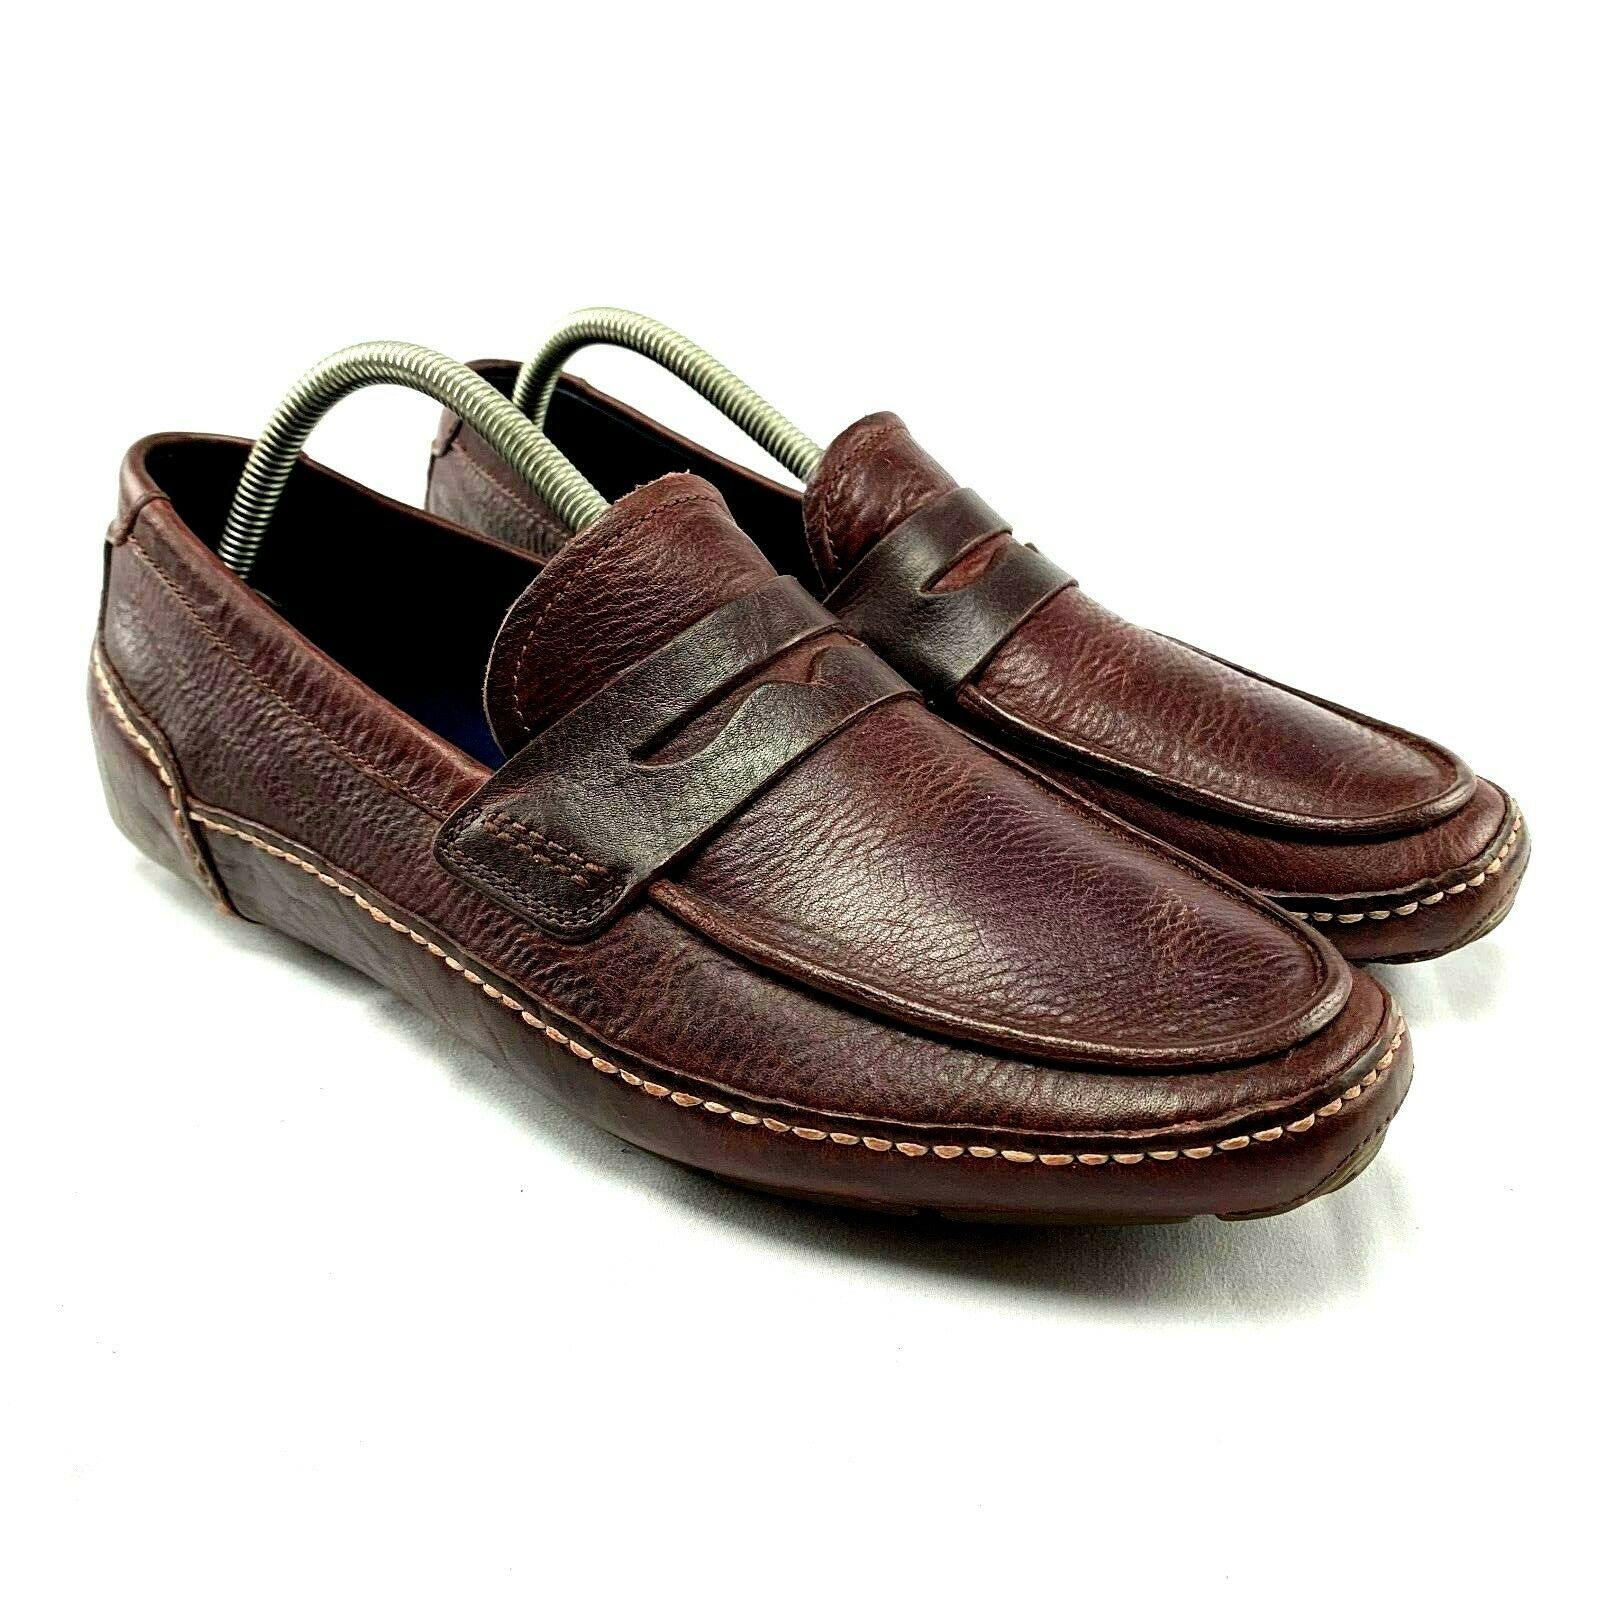 Cole Haan Men Dark Brown Leather Driving Loafers 8.5 US / 7.5 UK - Genuine Design Luxury Consignment